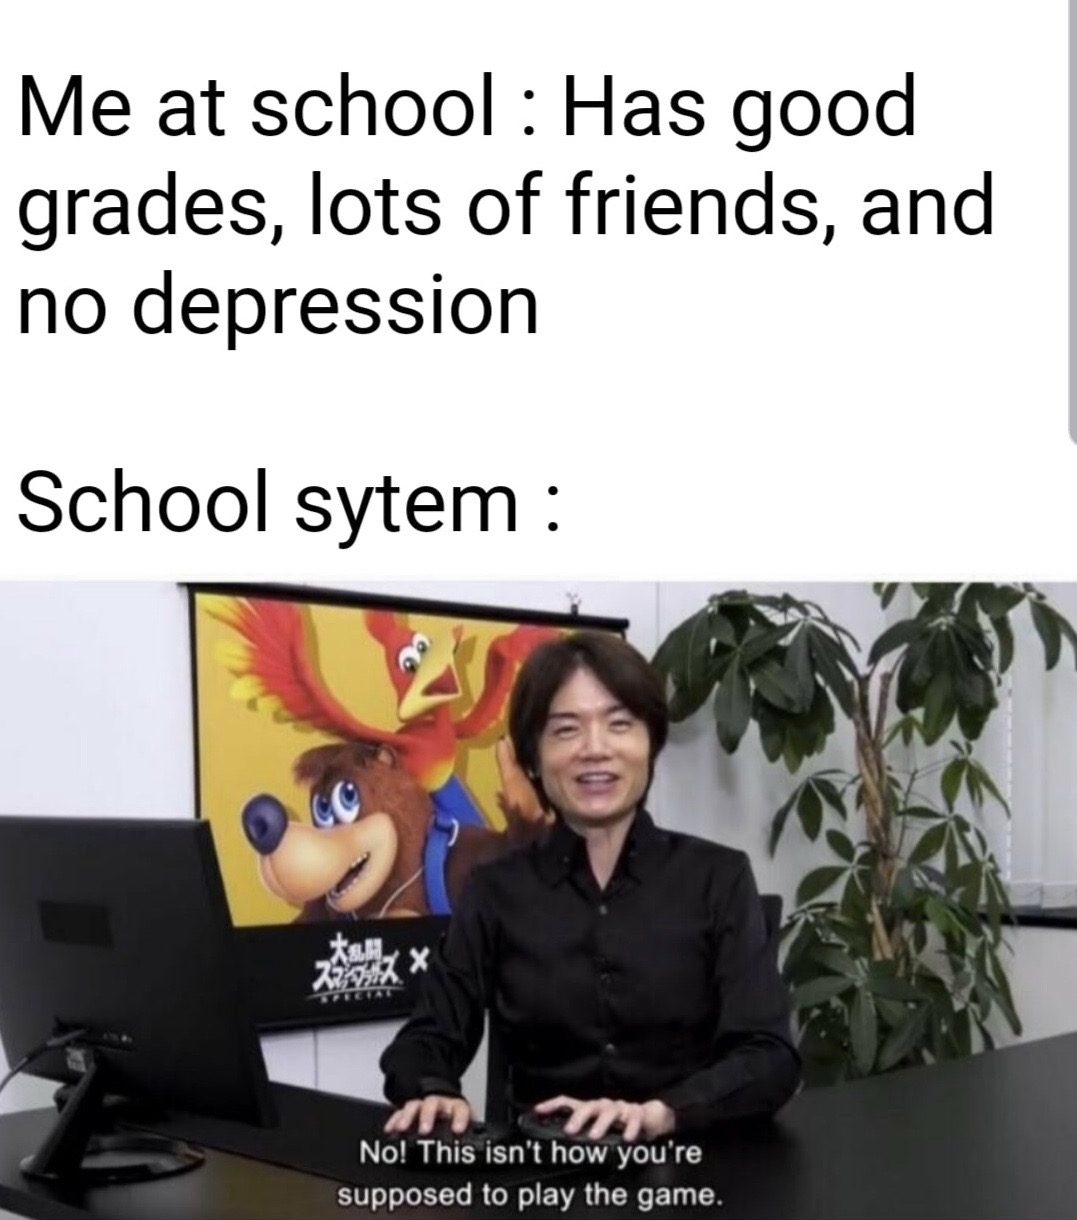 no this isn t how you re supposed to play the game sakurai - Me at school Has good grades, lots of friends, and no depression School sytem X 22 No! This isn't how you're supposed to play the game.